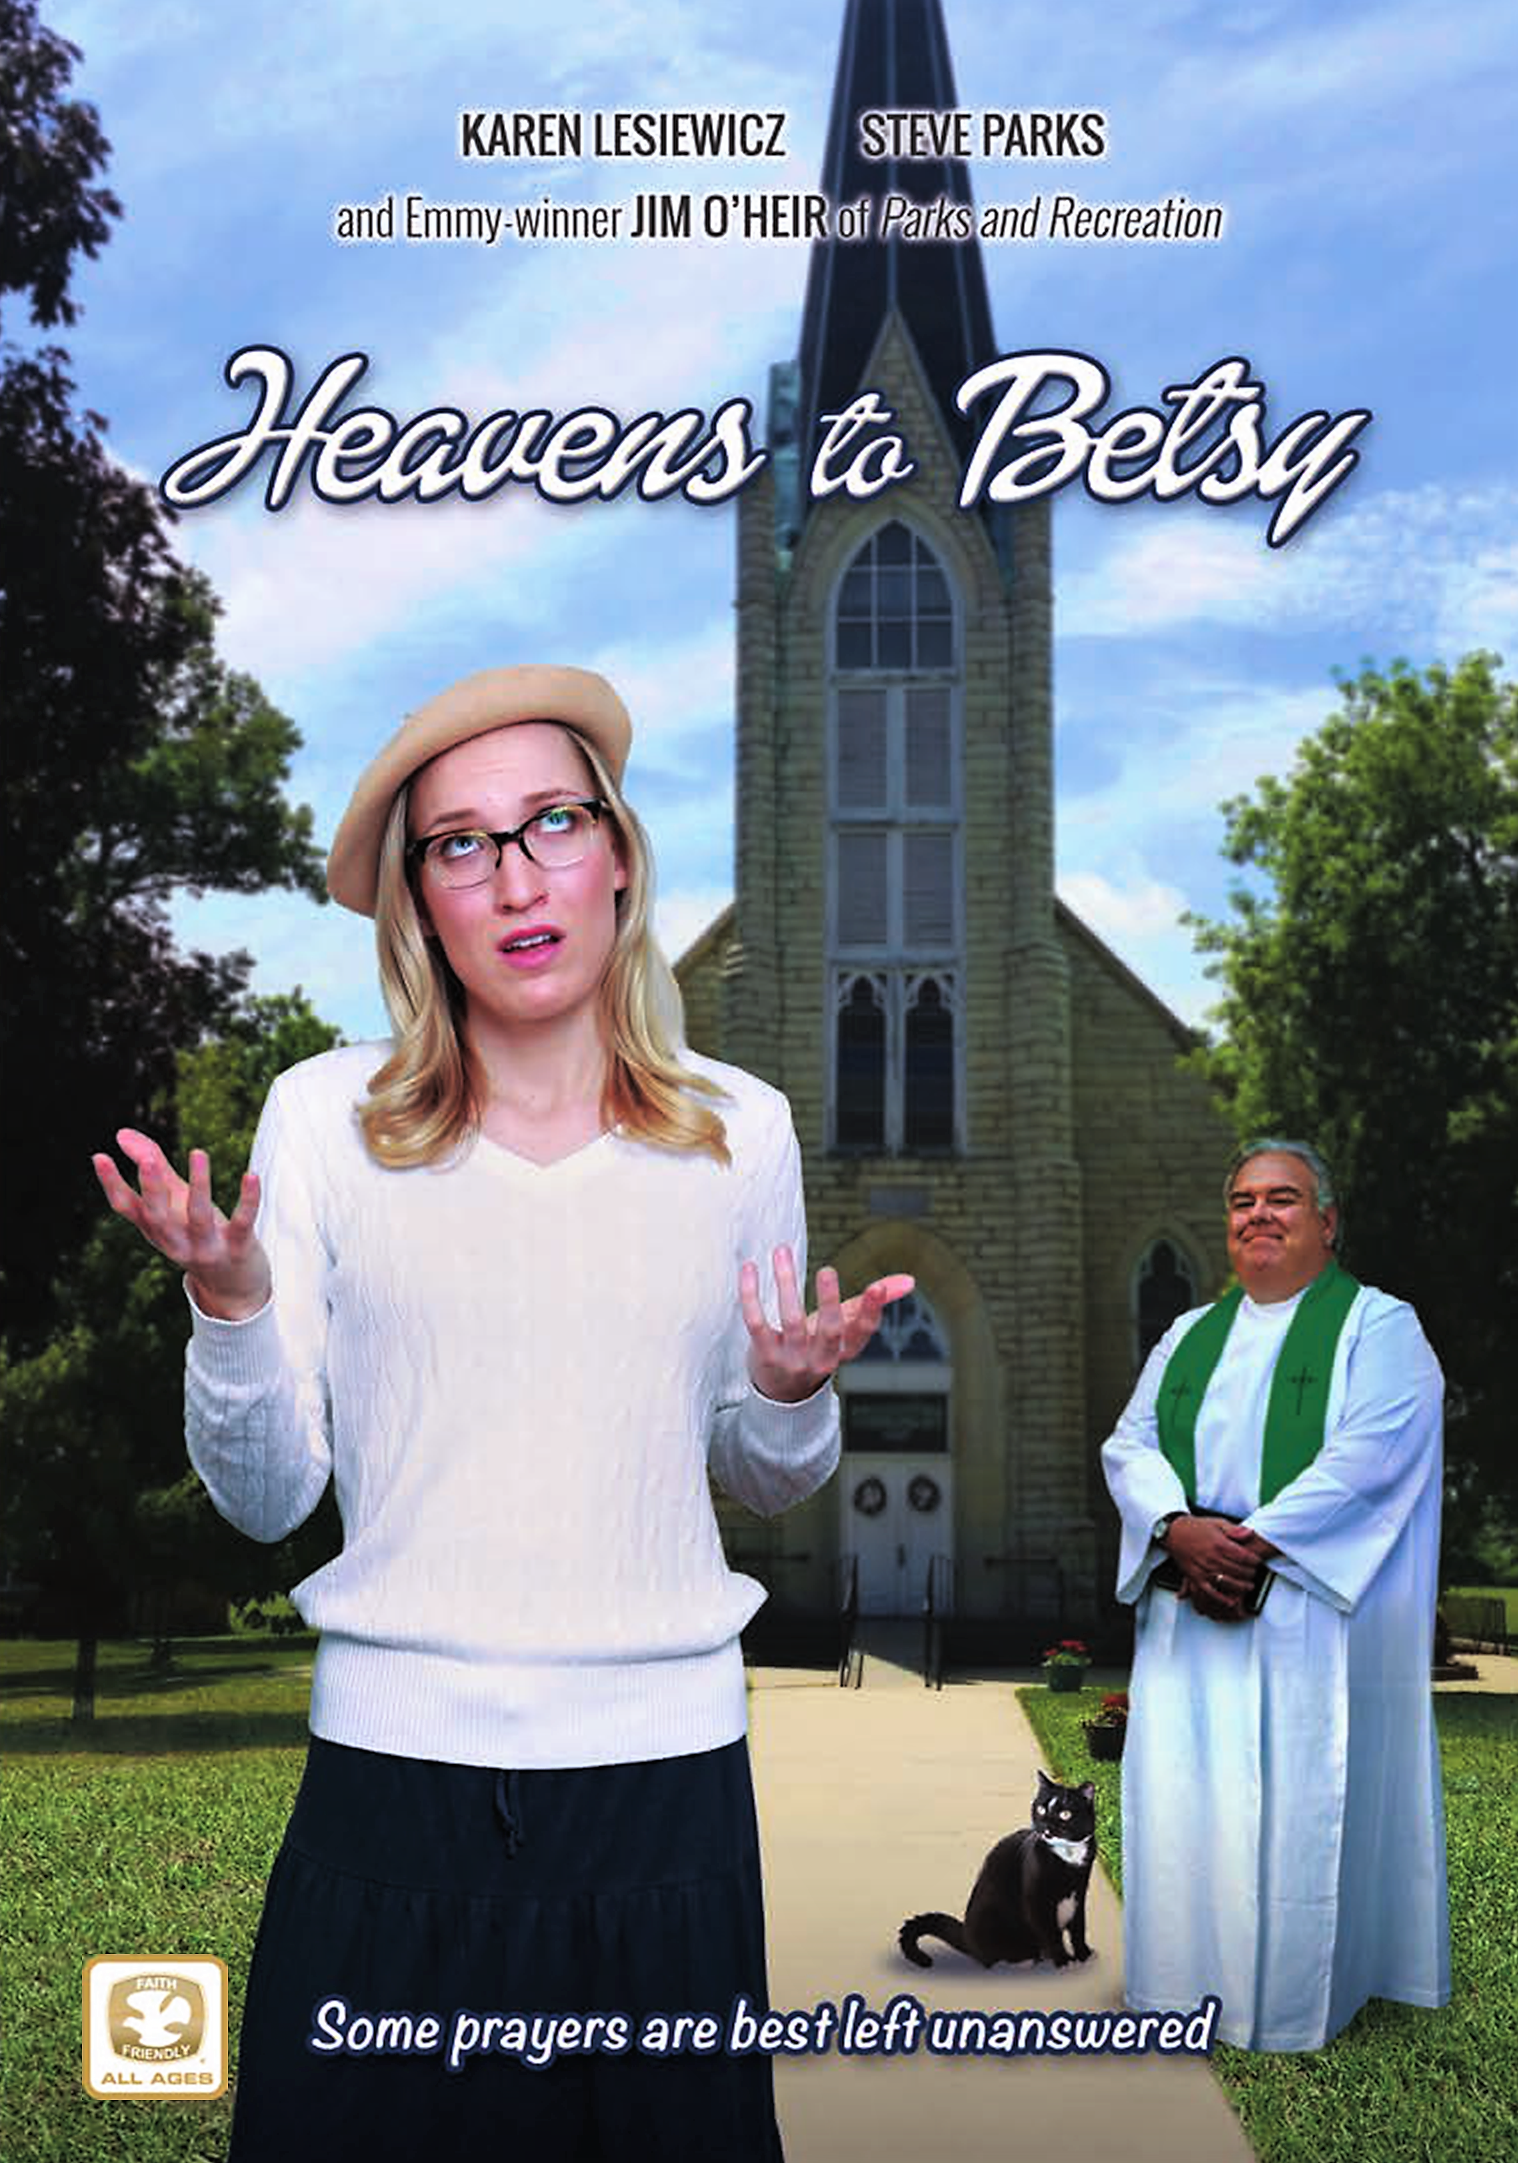 Heavens to Betsy DVD cover